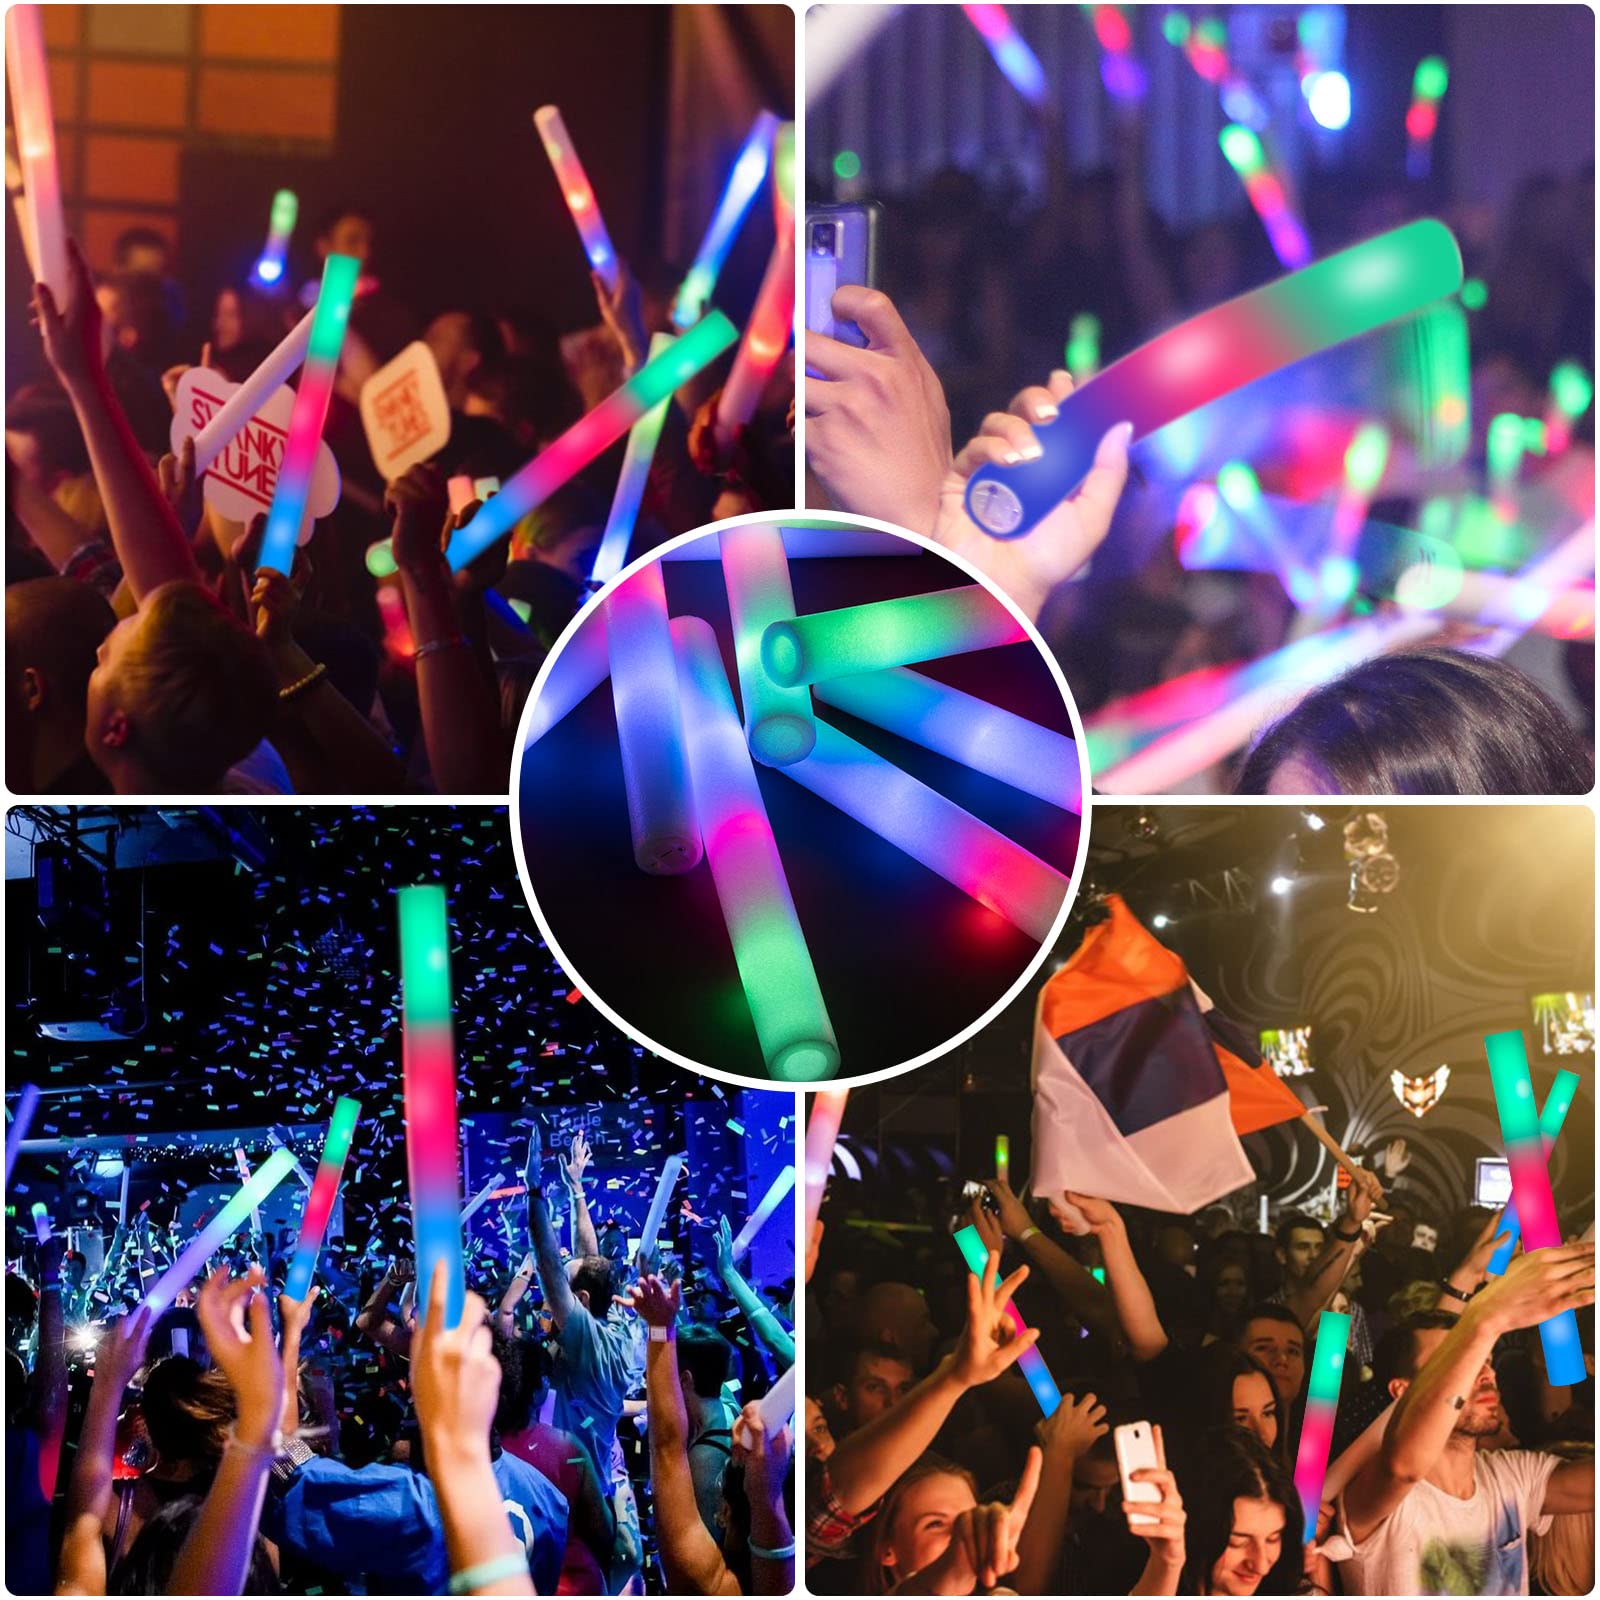 SHQDD Glow Sticks Bulk, 28 Pcs LED Foam Sticks with 3 Modes Colorful Flashing, Glow in the Dark Party Supplies for Wedding, Raves, Concert, Party, Camping, Sporting Events, New Year Carnival